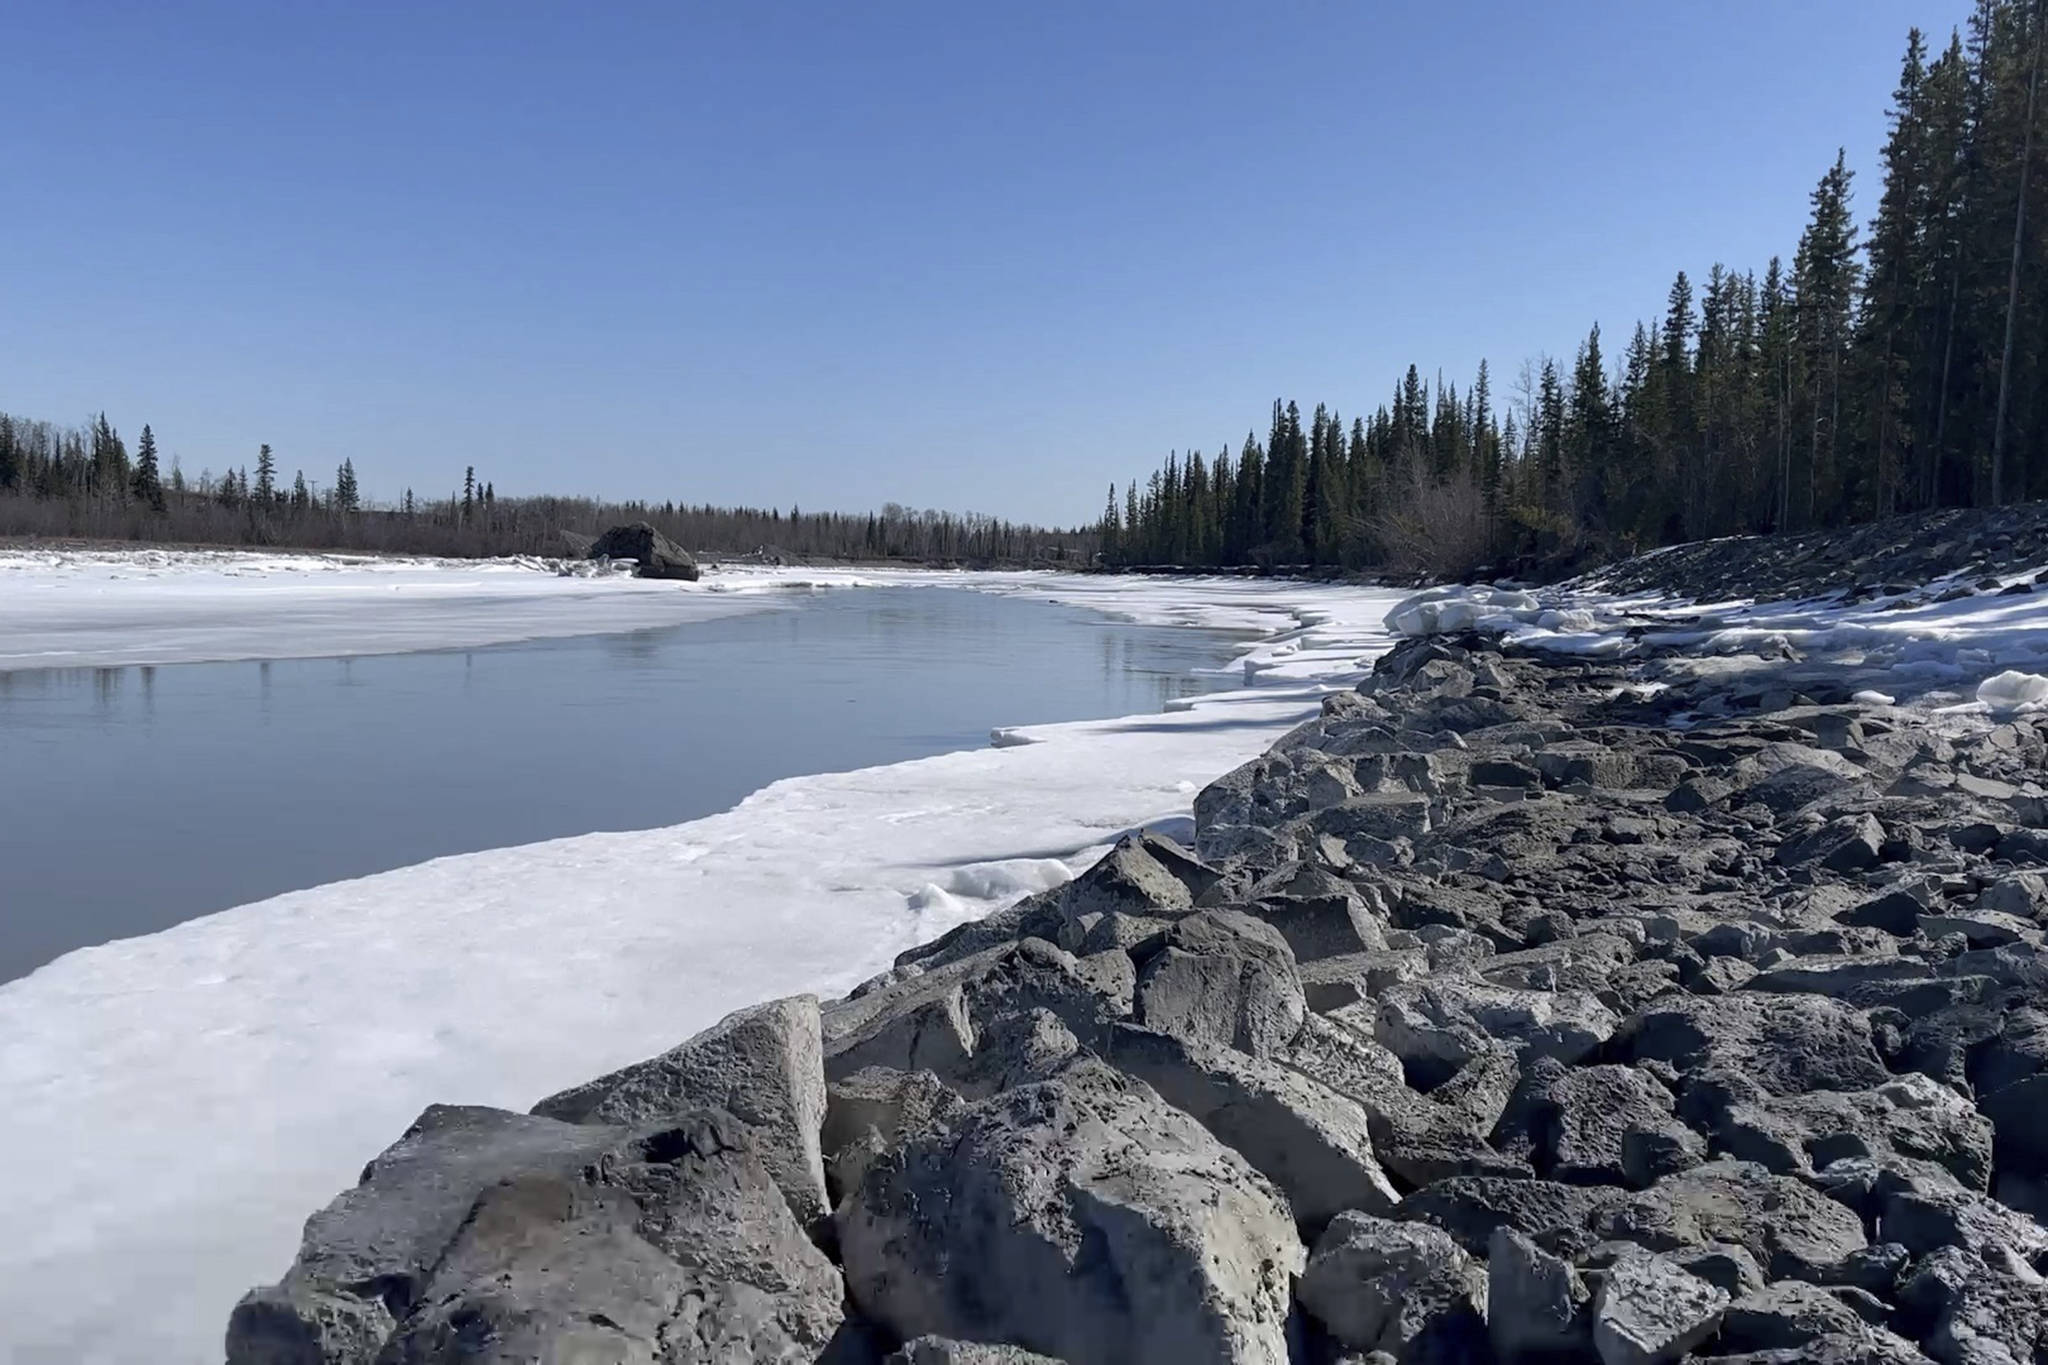 In this April 22, 2021, photo, signs of spring thaw appear along the Tazlina River in Tazlina, Alaska. The Catholic Church wants to sell 462 acres that once housed the Copper Valley mission school to the Native Village of Tazlina, a federally recognized tribe. The tribe is scrambling to raise the nearly $1.9 million asking price so it can regain stewardship of its ancestral land. (John Tierney/Indian Country Today)